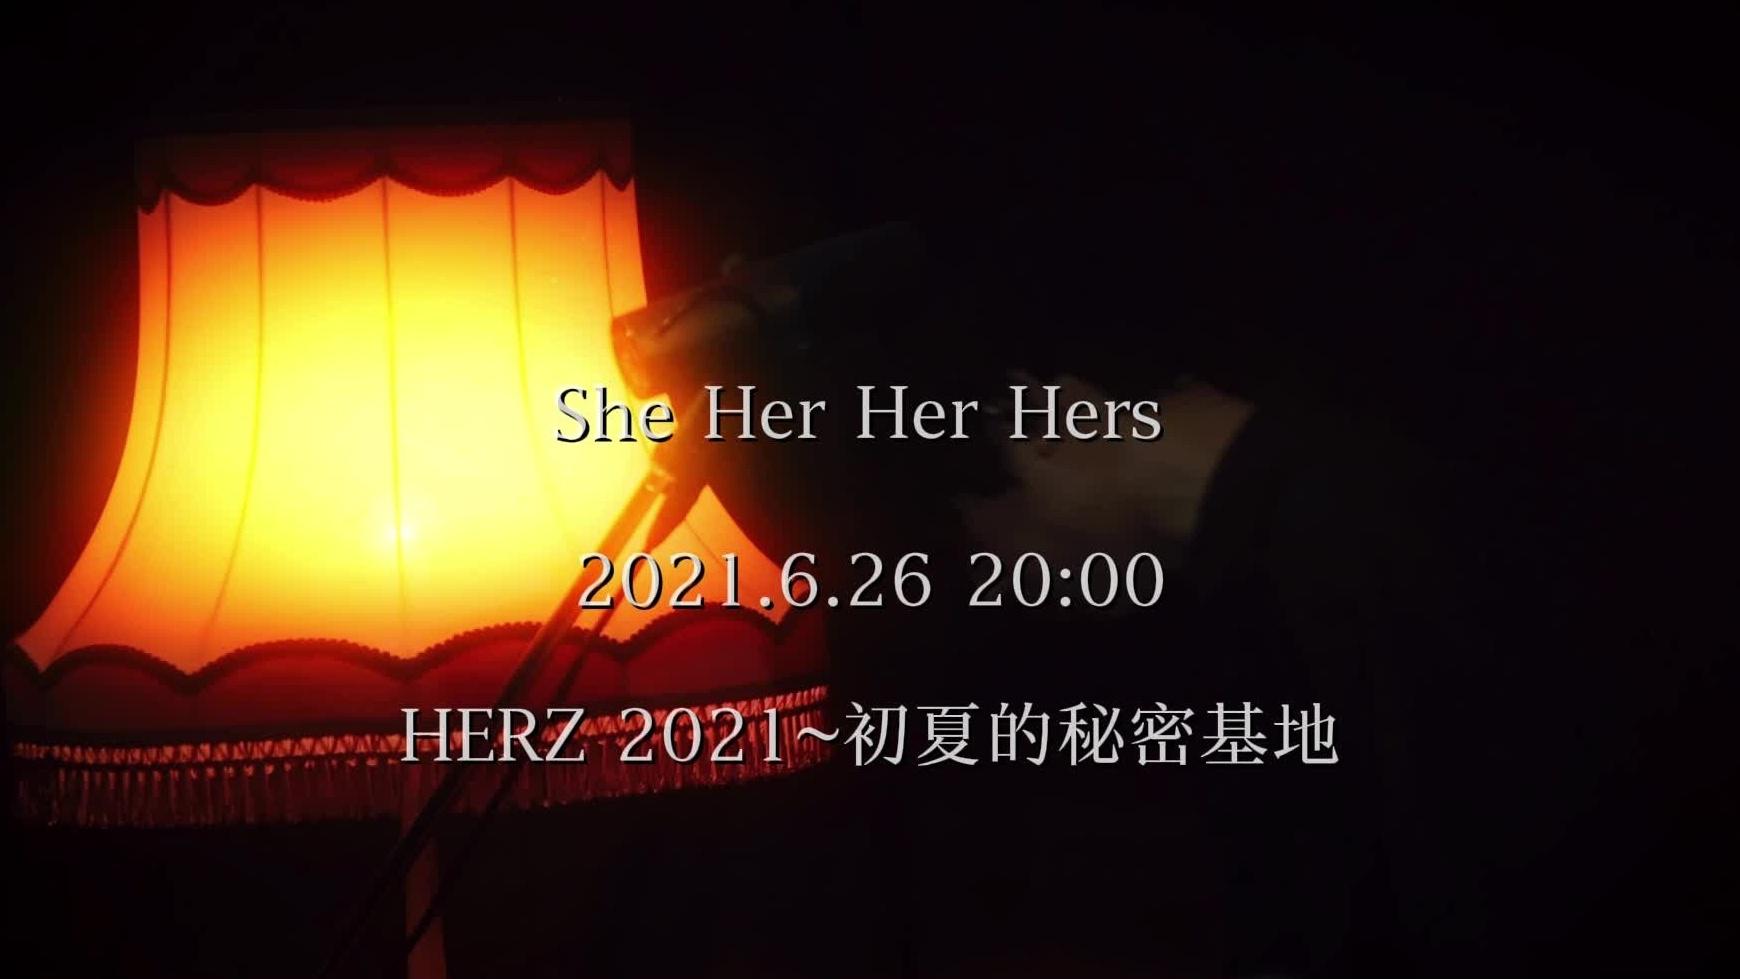 She Her Her Hers - She Her Her Hers6月26日线上演唱会的问候视频